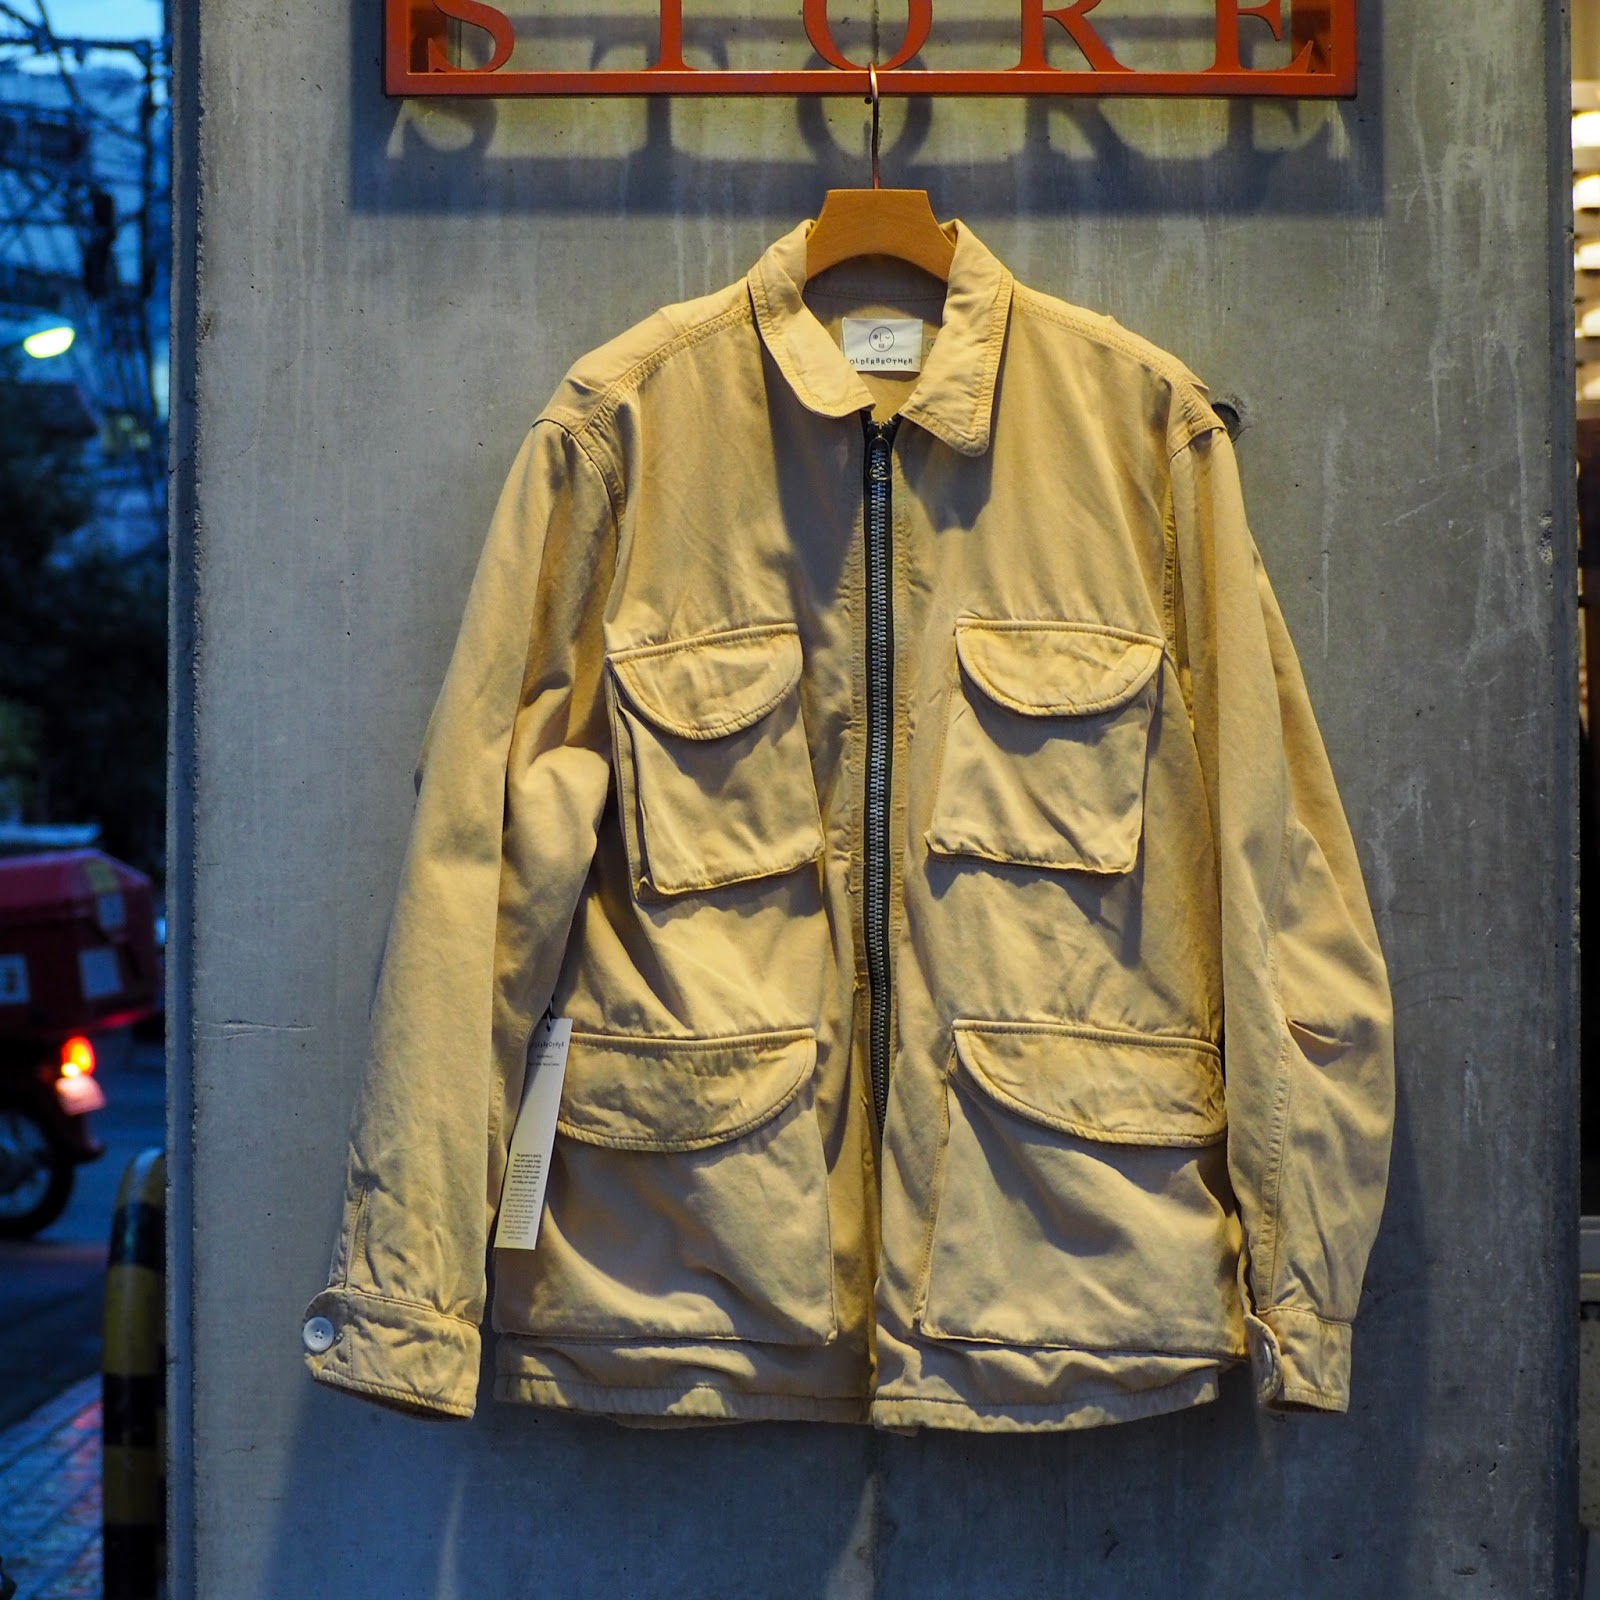 MORE PEACEFULL, LESS COMBAT: M65 FIELD JACKET FROM OLDER BROTHER